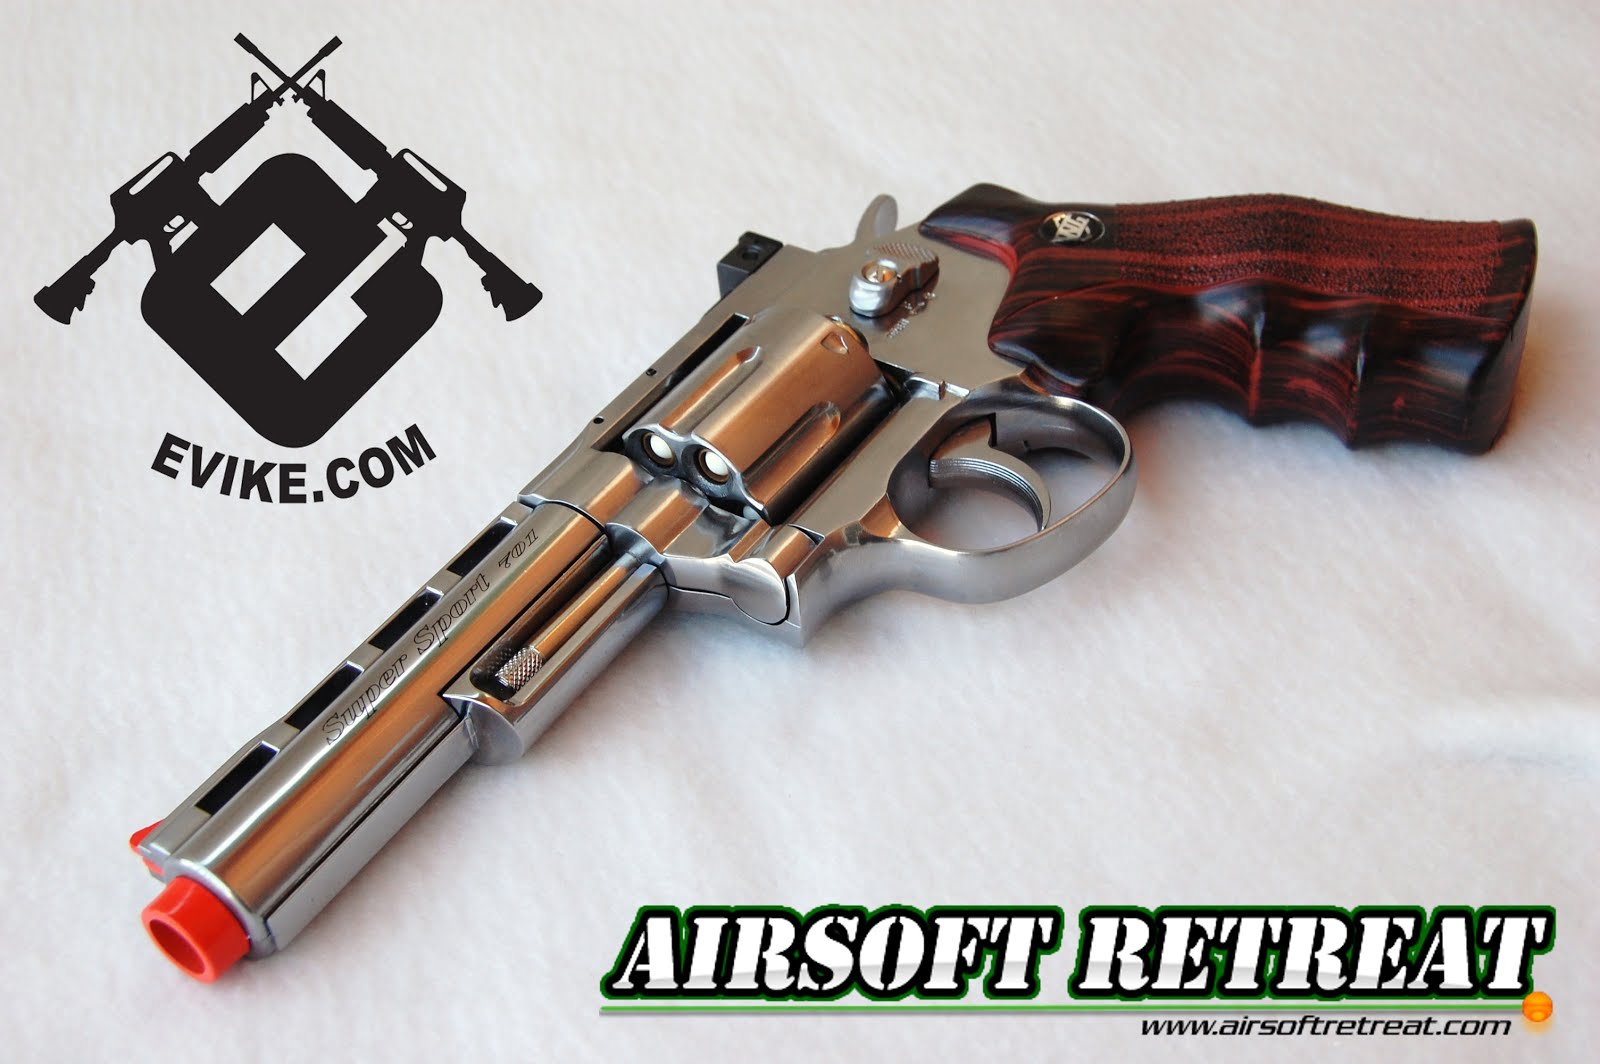 Airsoft revolver - pros and cons